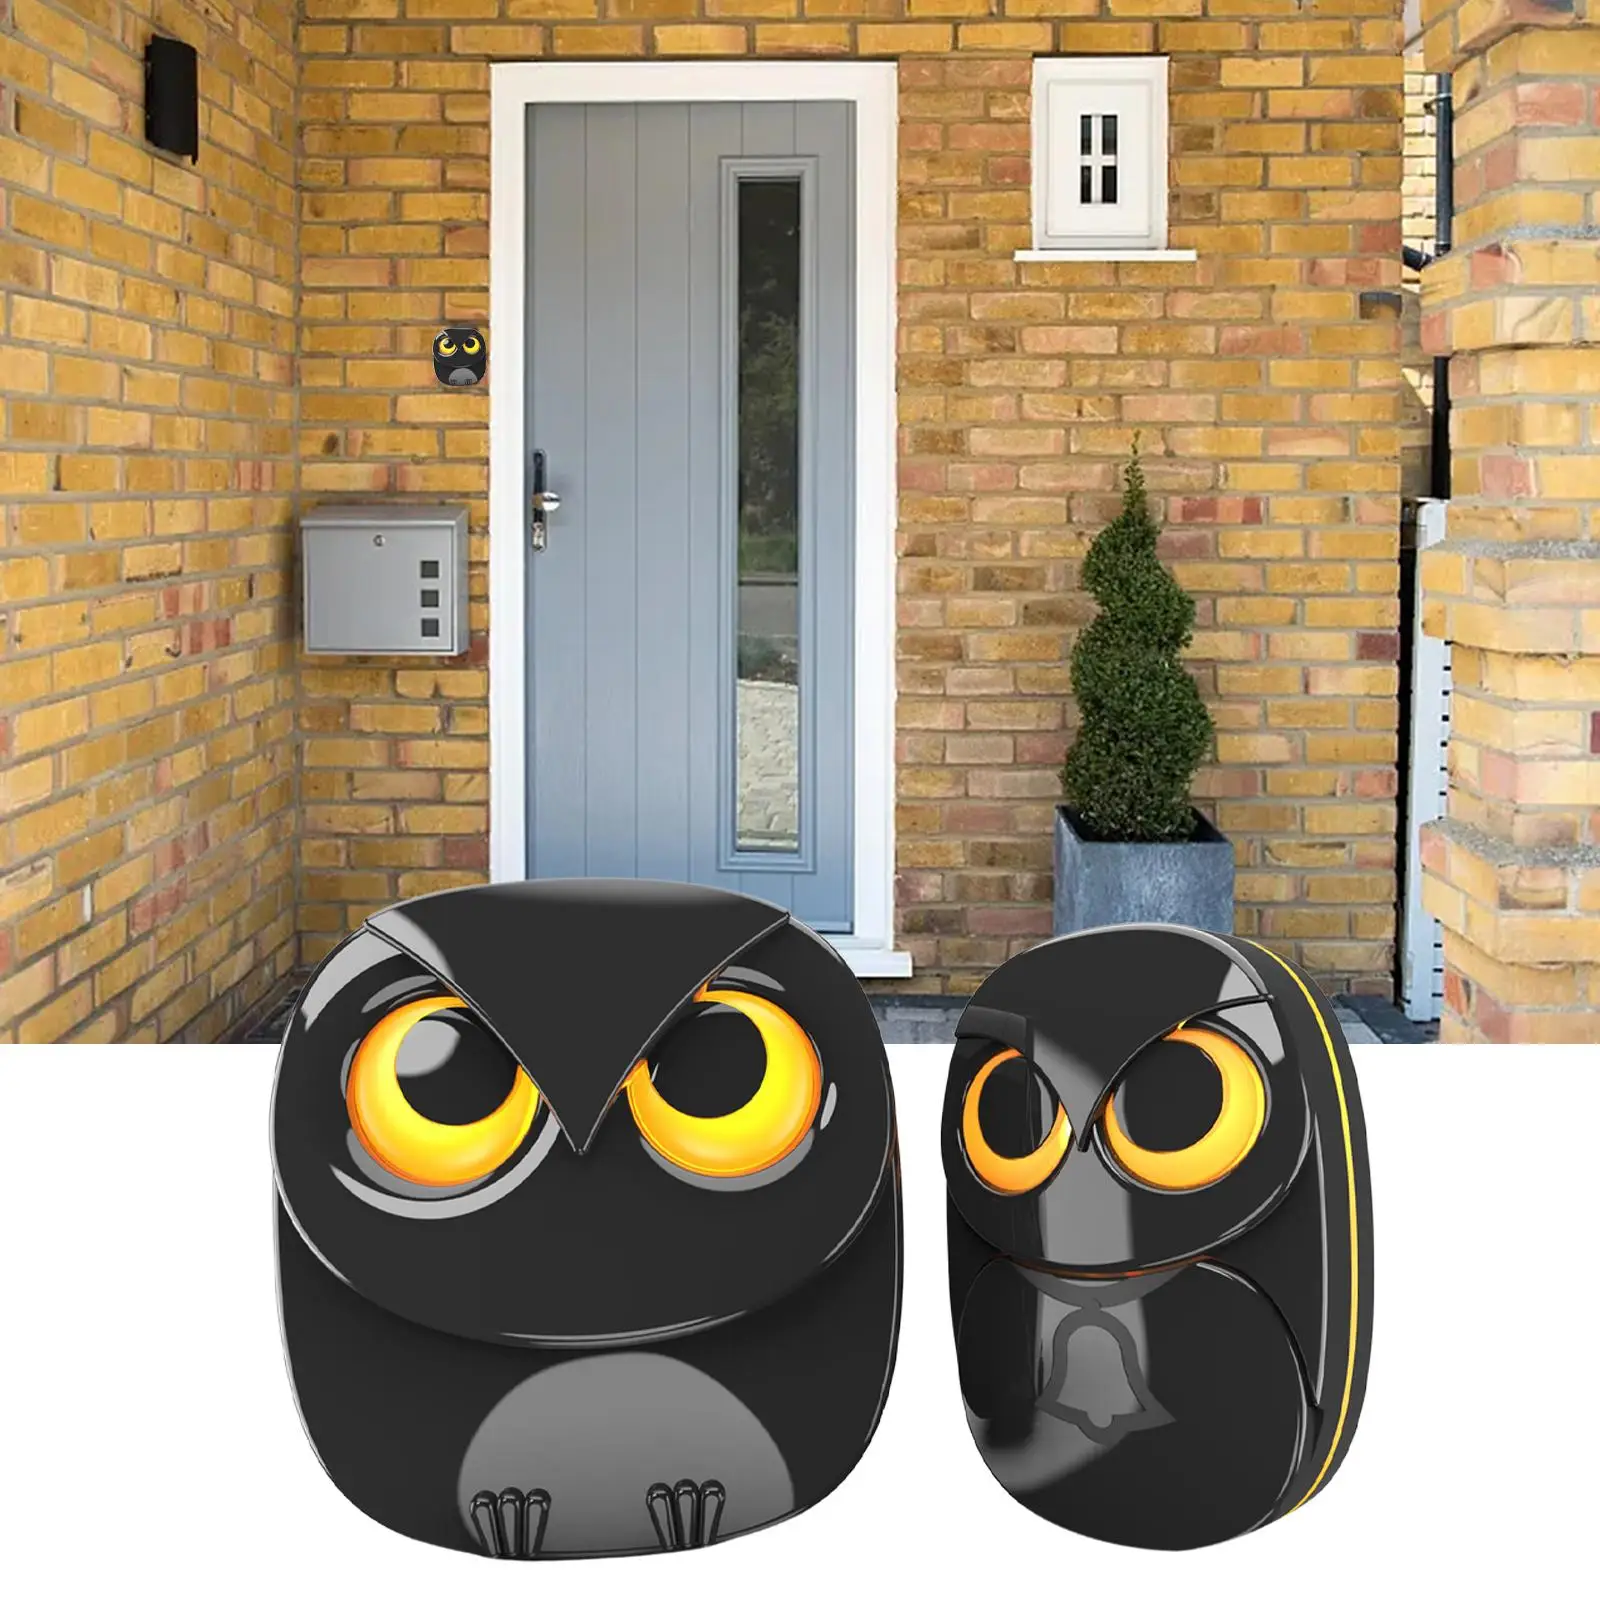 Wireless Driveway Security Alarm Sturdy Simple Using Decoration Supplies Creative Owl Shape for Home Shed Office Garage UK Plug